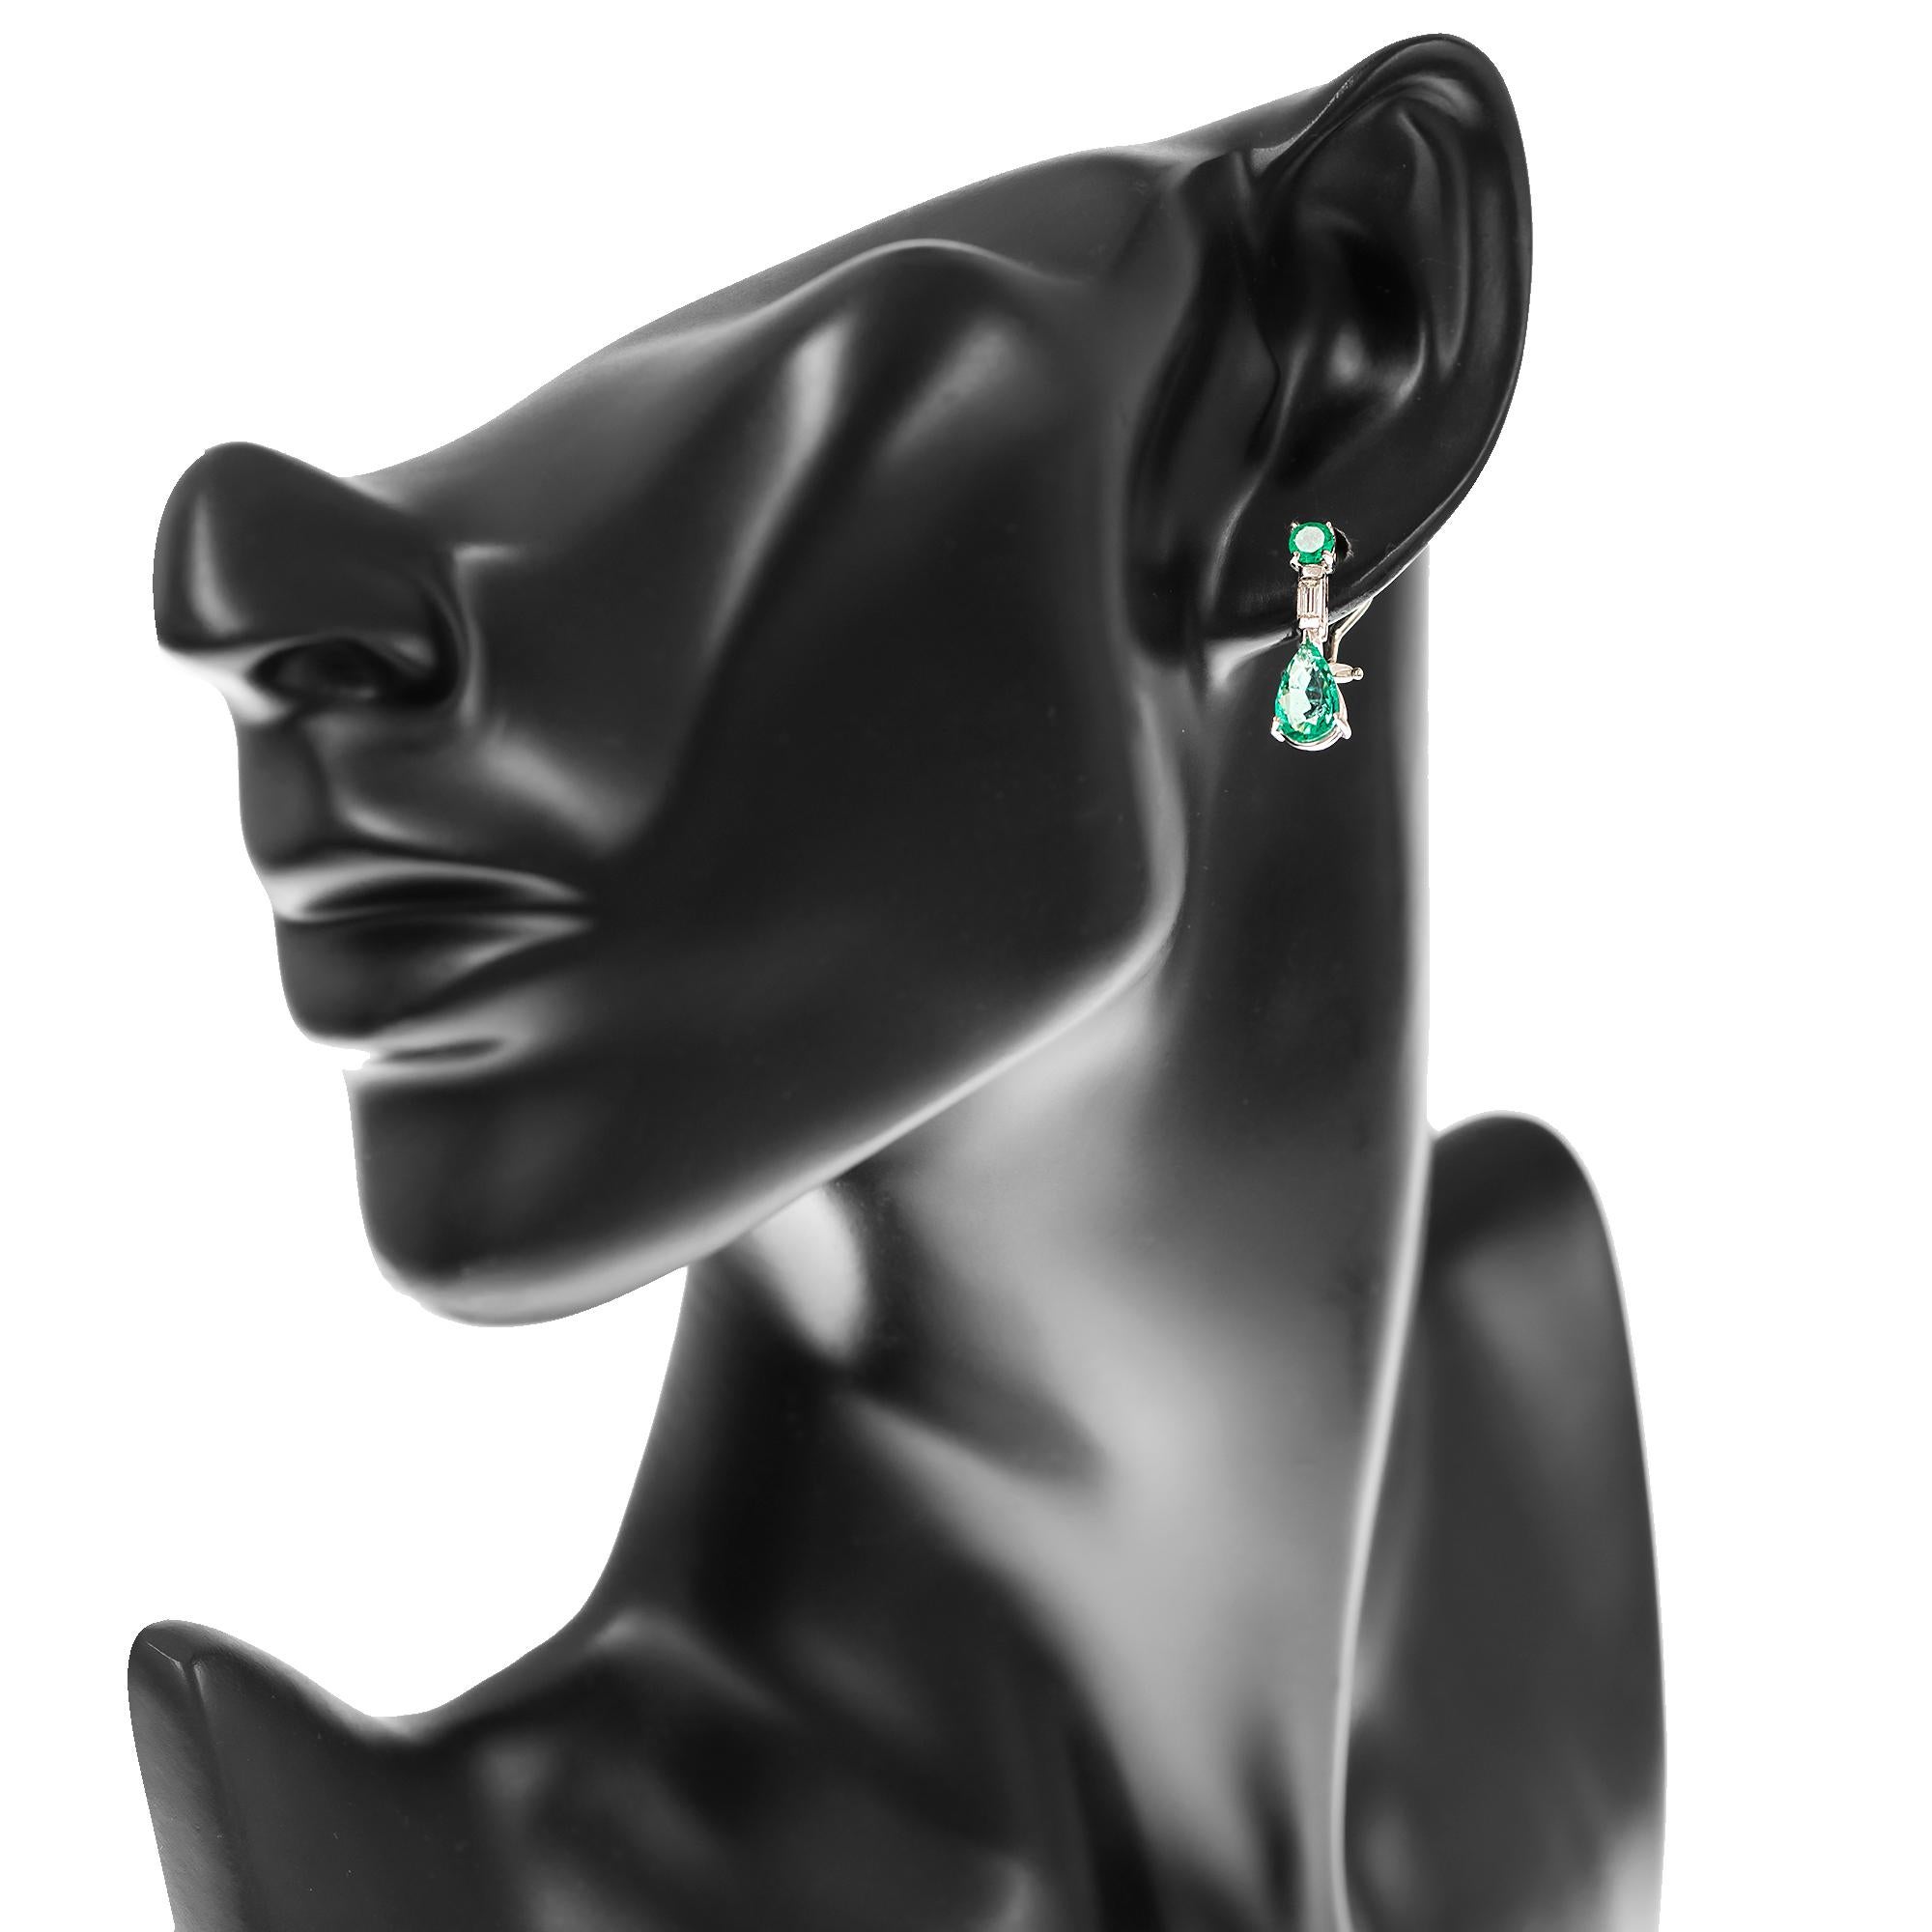 Crafted in platinum, this pair of earrings features pear and round cut natural bright green emeralds with baguette cut diamonds.
With a stud like fitting appearance the earrings sit firm on the ear with a drop just below the earlobe.
Fitted with a